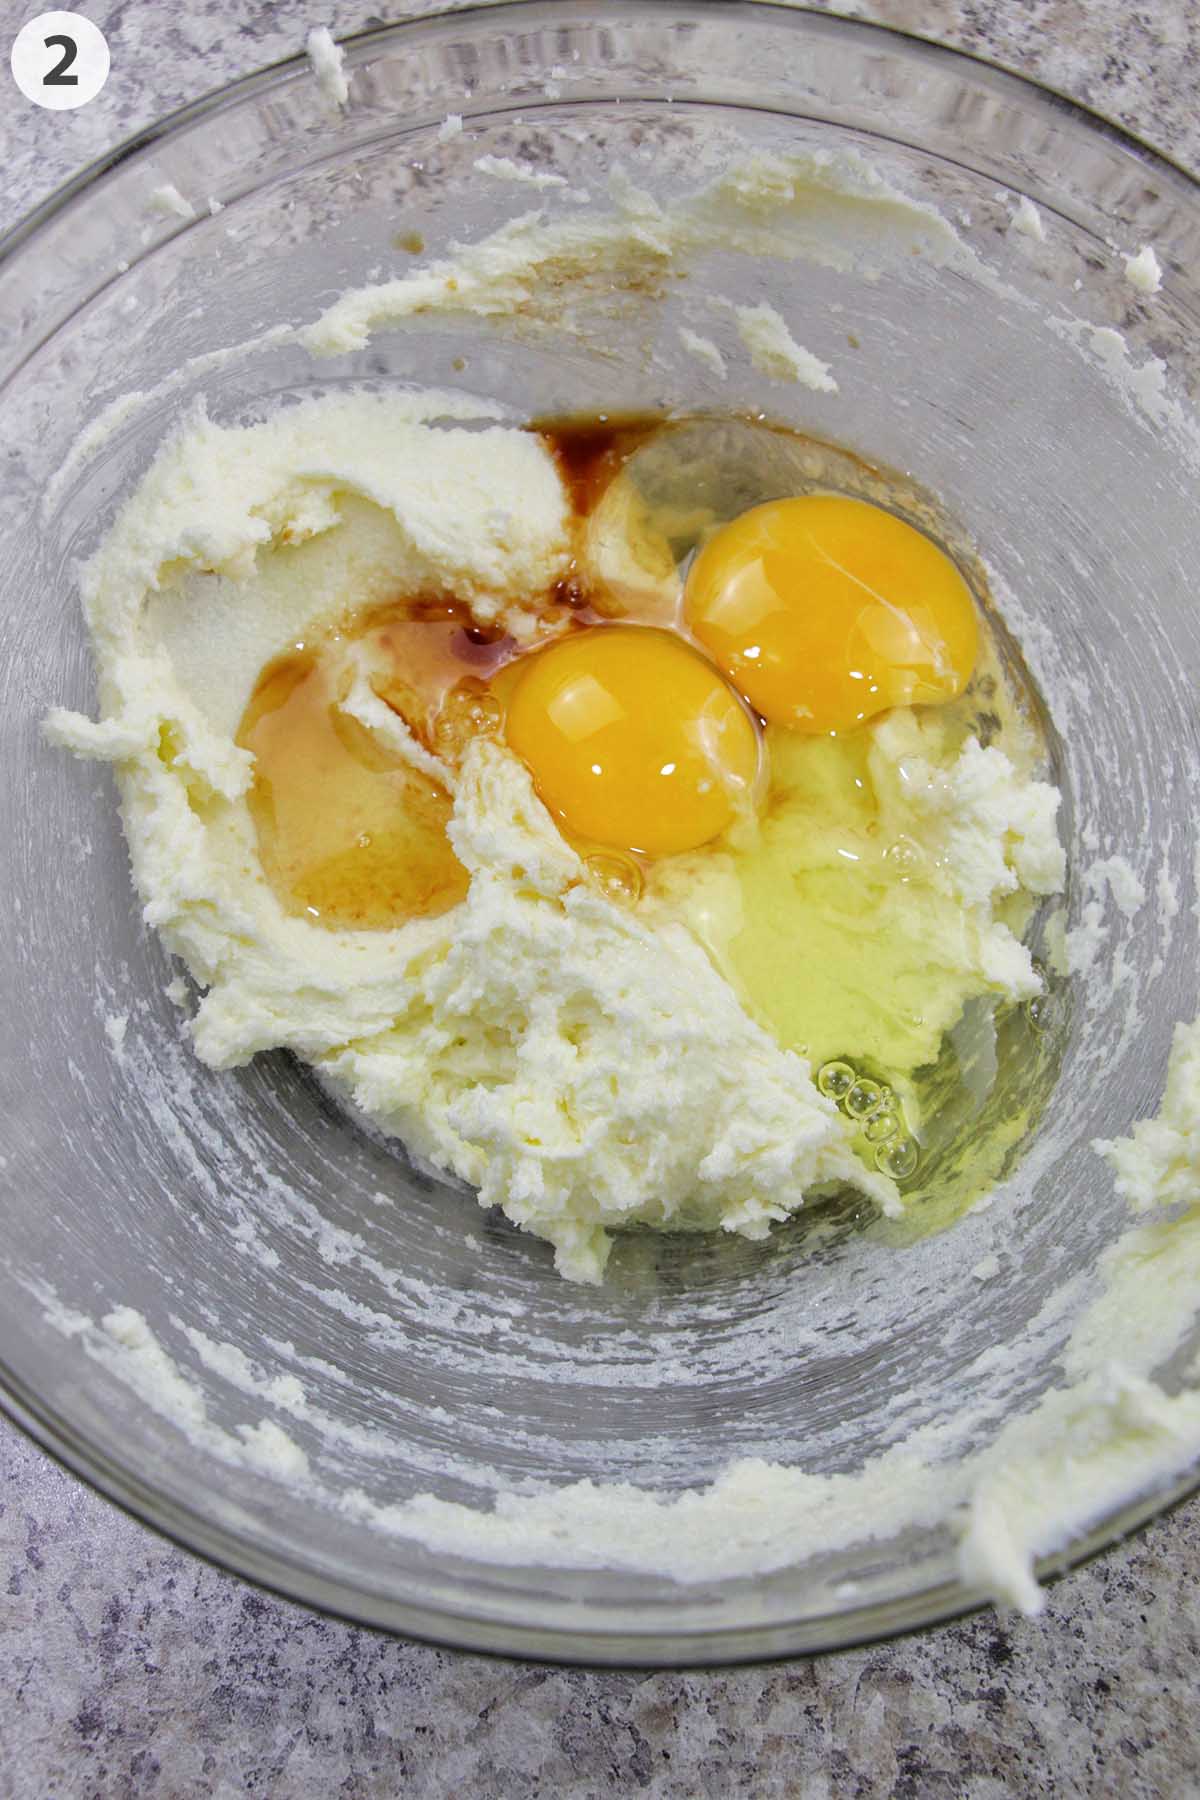 numbered photo showing eggs and vanilla with creamed butter.